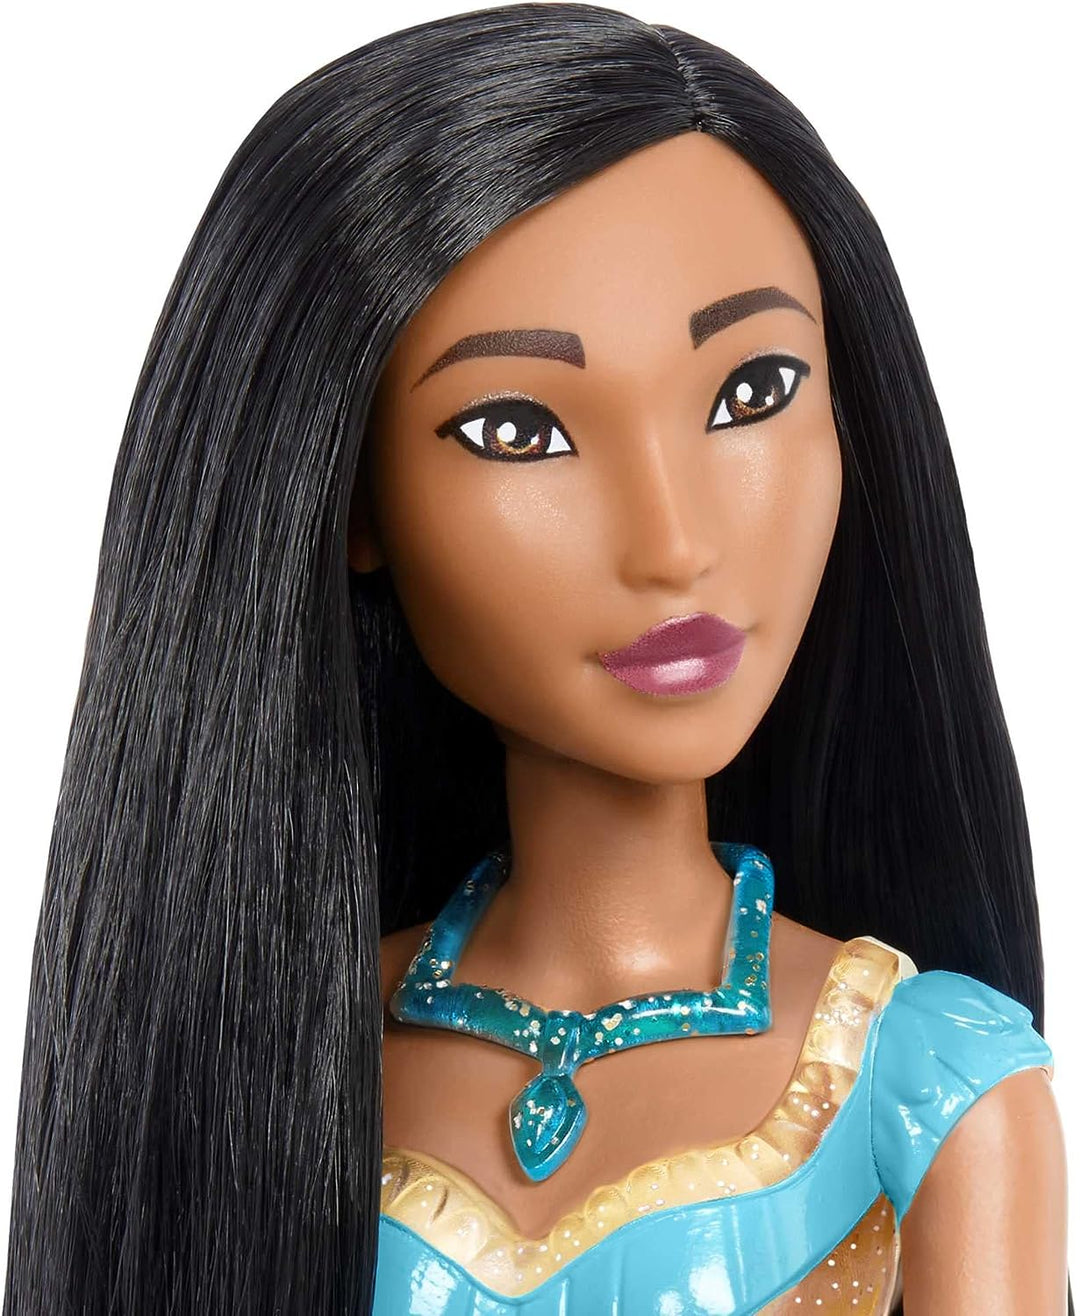 Disney Princess Toys, Pocahontas Posable Fashion Doll with Sparkling Clothing and Accessories